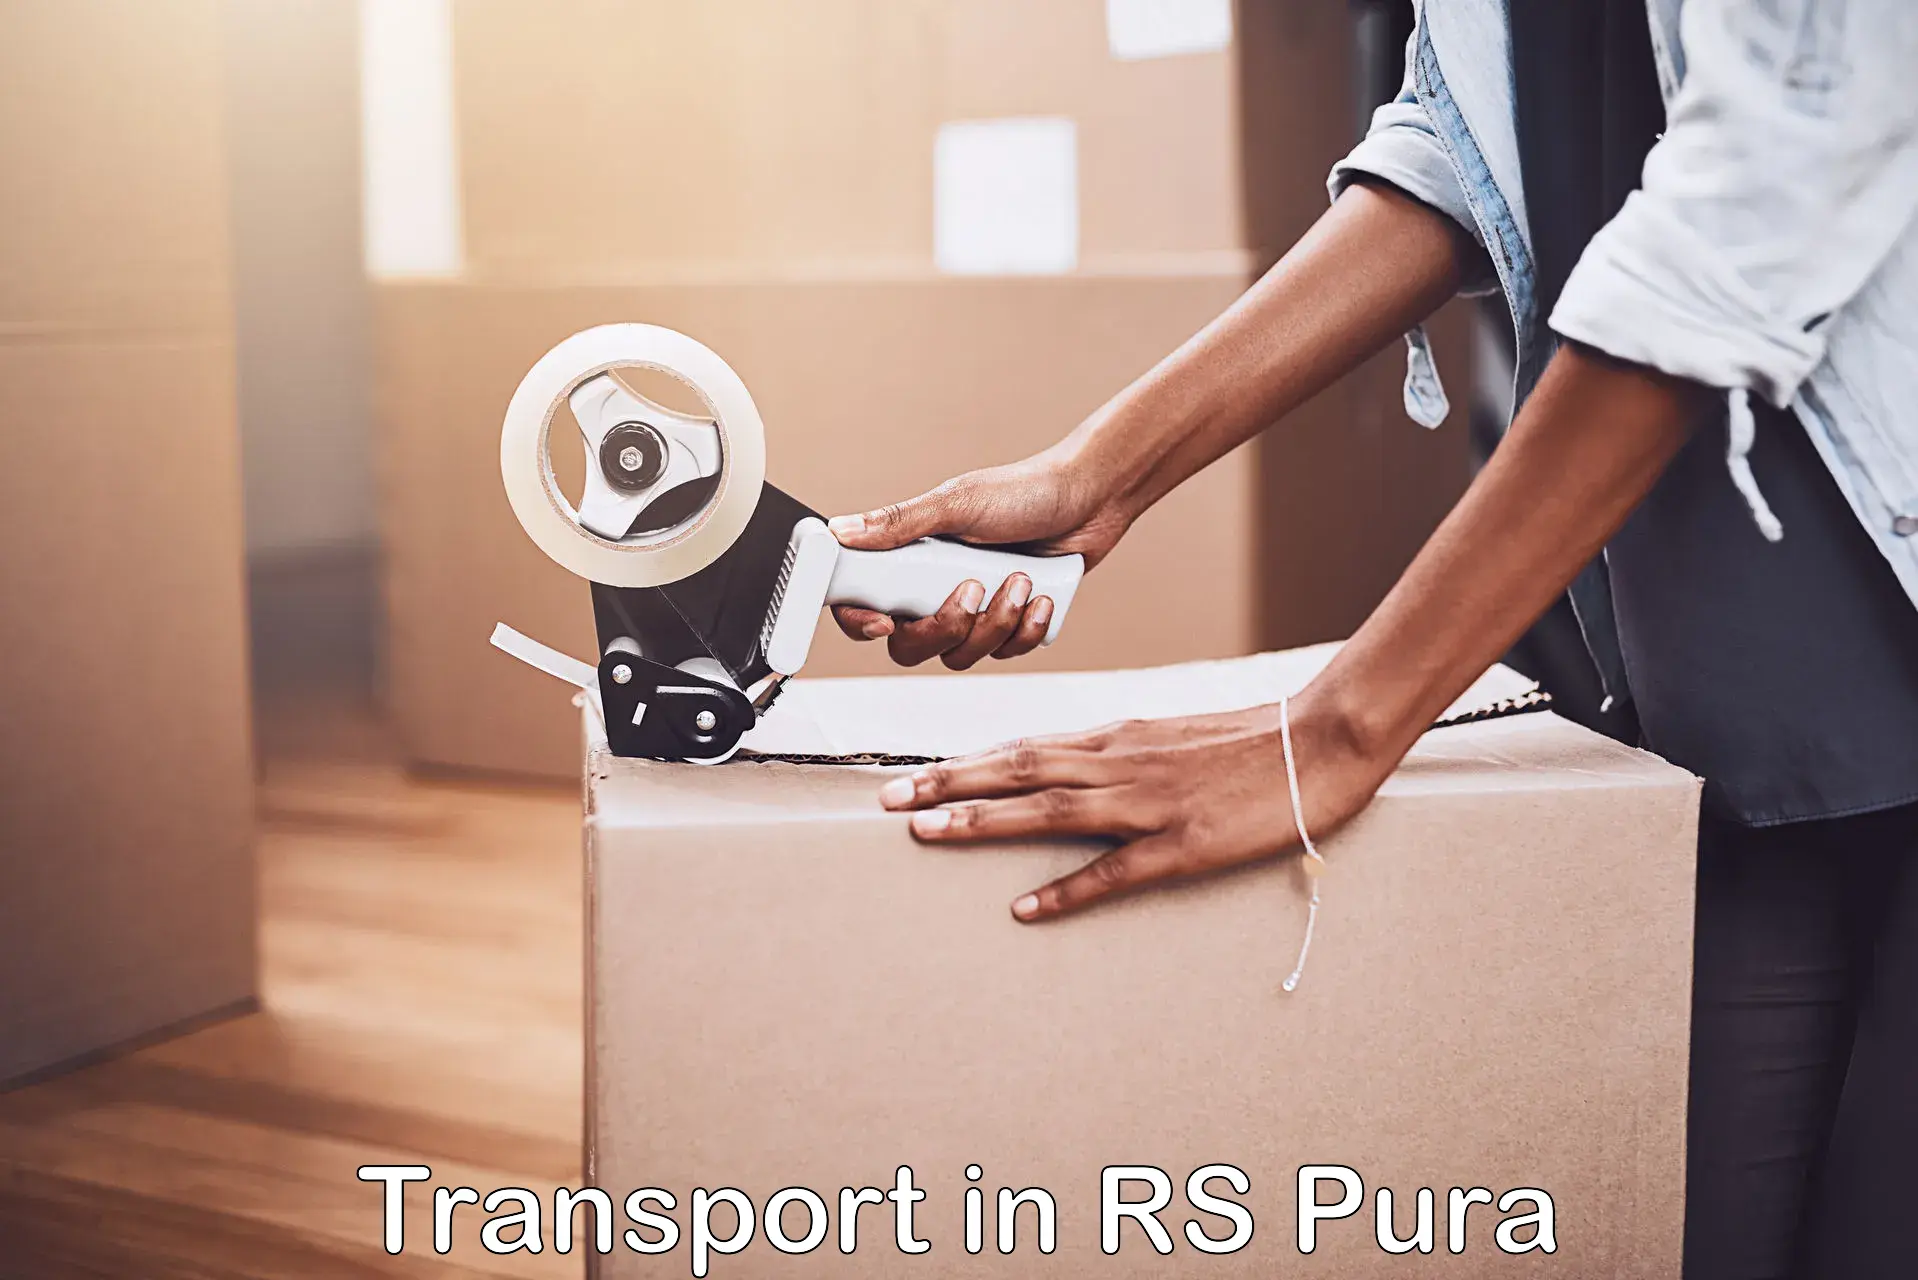 Container transportation services in RS Pura